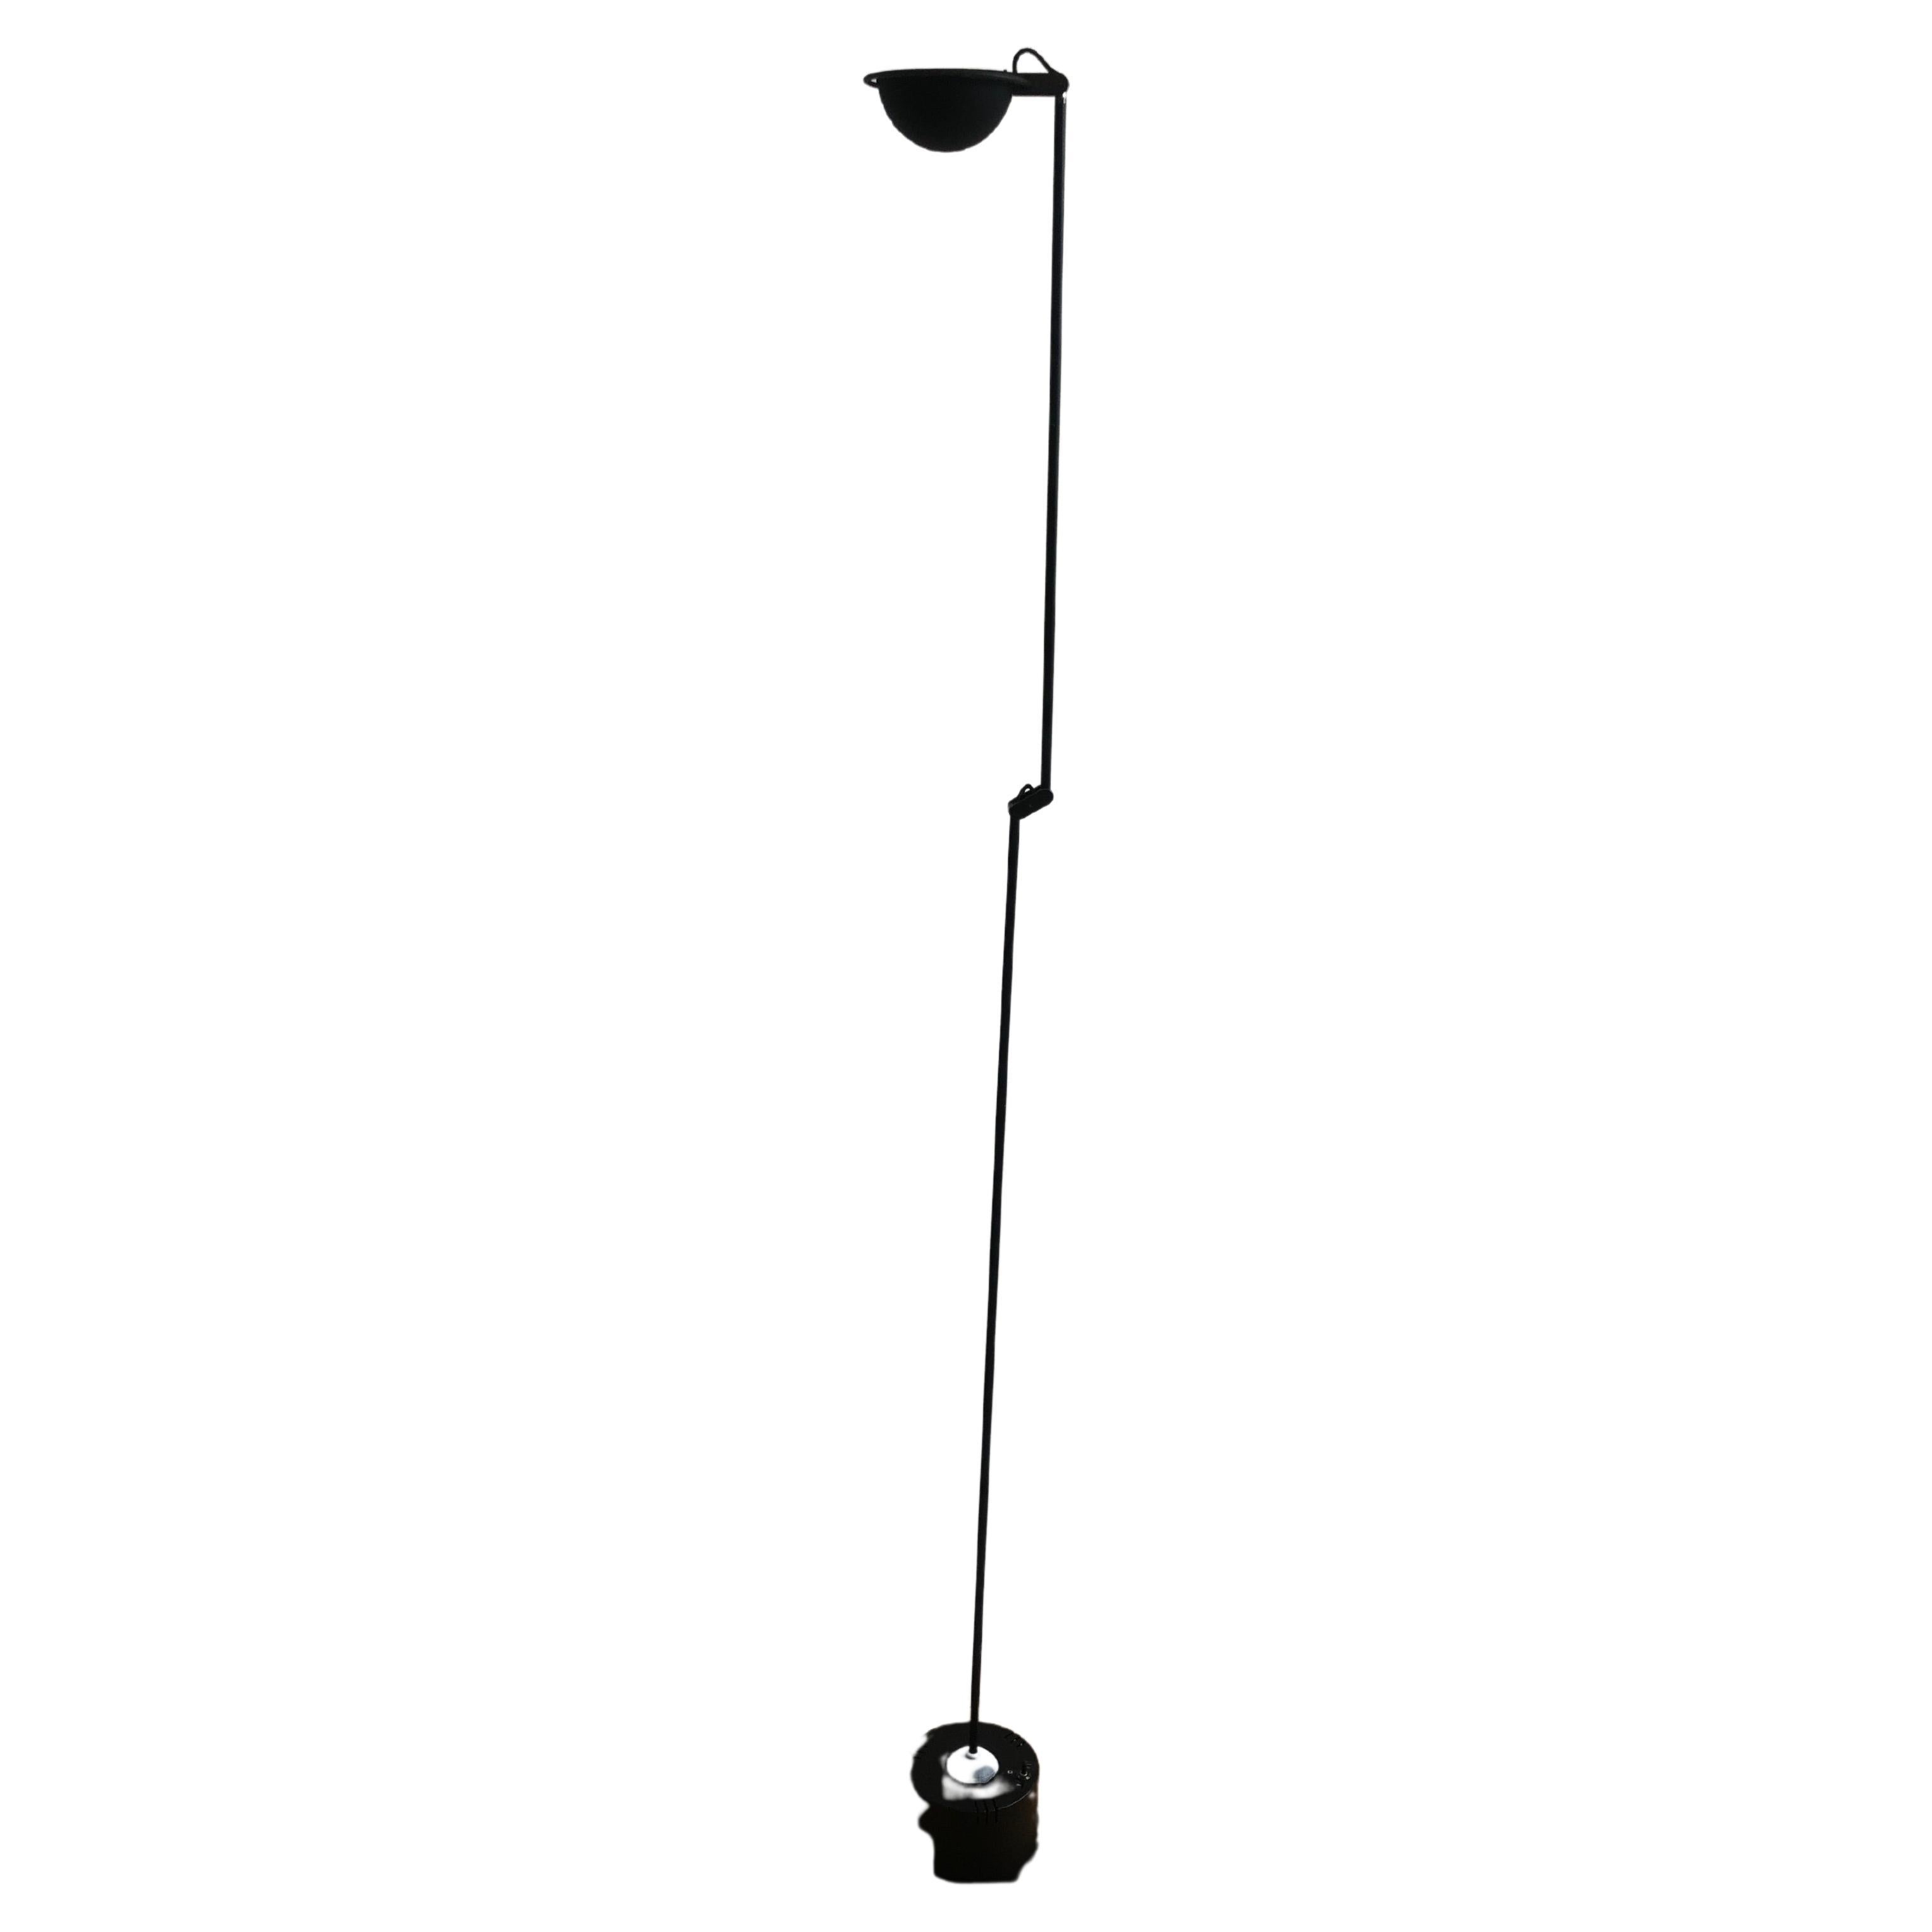 The Ball lamp was designed by the Swiss designer Hannes Wettstein in 1982.
Manufacturer: Belux.
Wonderful design - a great classic.

The brightness of the lamp can be adjusted in two levels.
The rod can be rotated on the ball,
Early version in which